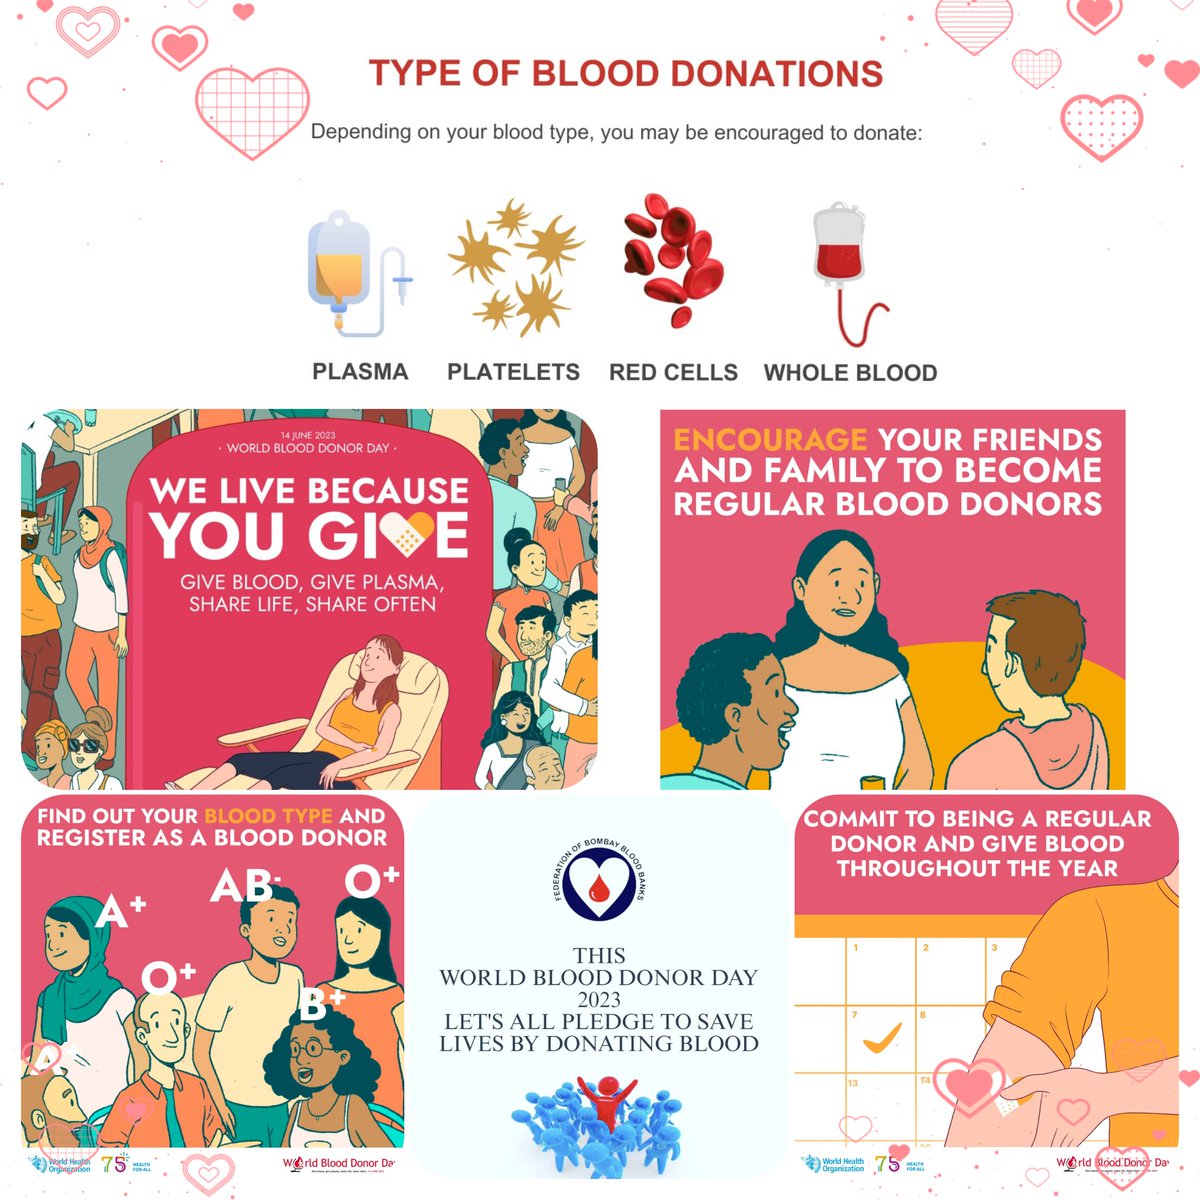 World Blood Donor Day 2023! 
14th June 2023. 
Come let's celebrate lives together!
Give Blood, Give Plasma, Share Life, Share Often!
#isbtwbdd2023 #isbtclinical #Fbbb
#bloodbank #blooddonation #transfusionmedicine #transfusion #donateblood #savelives #thankyou #gratitude #blessed